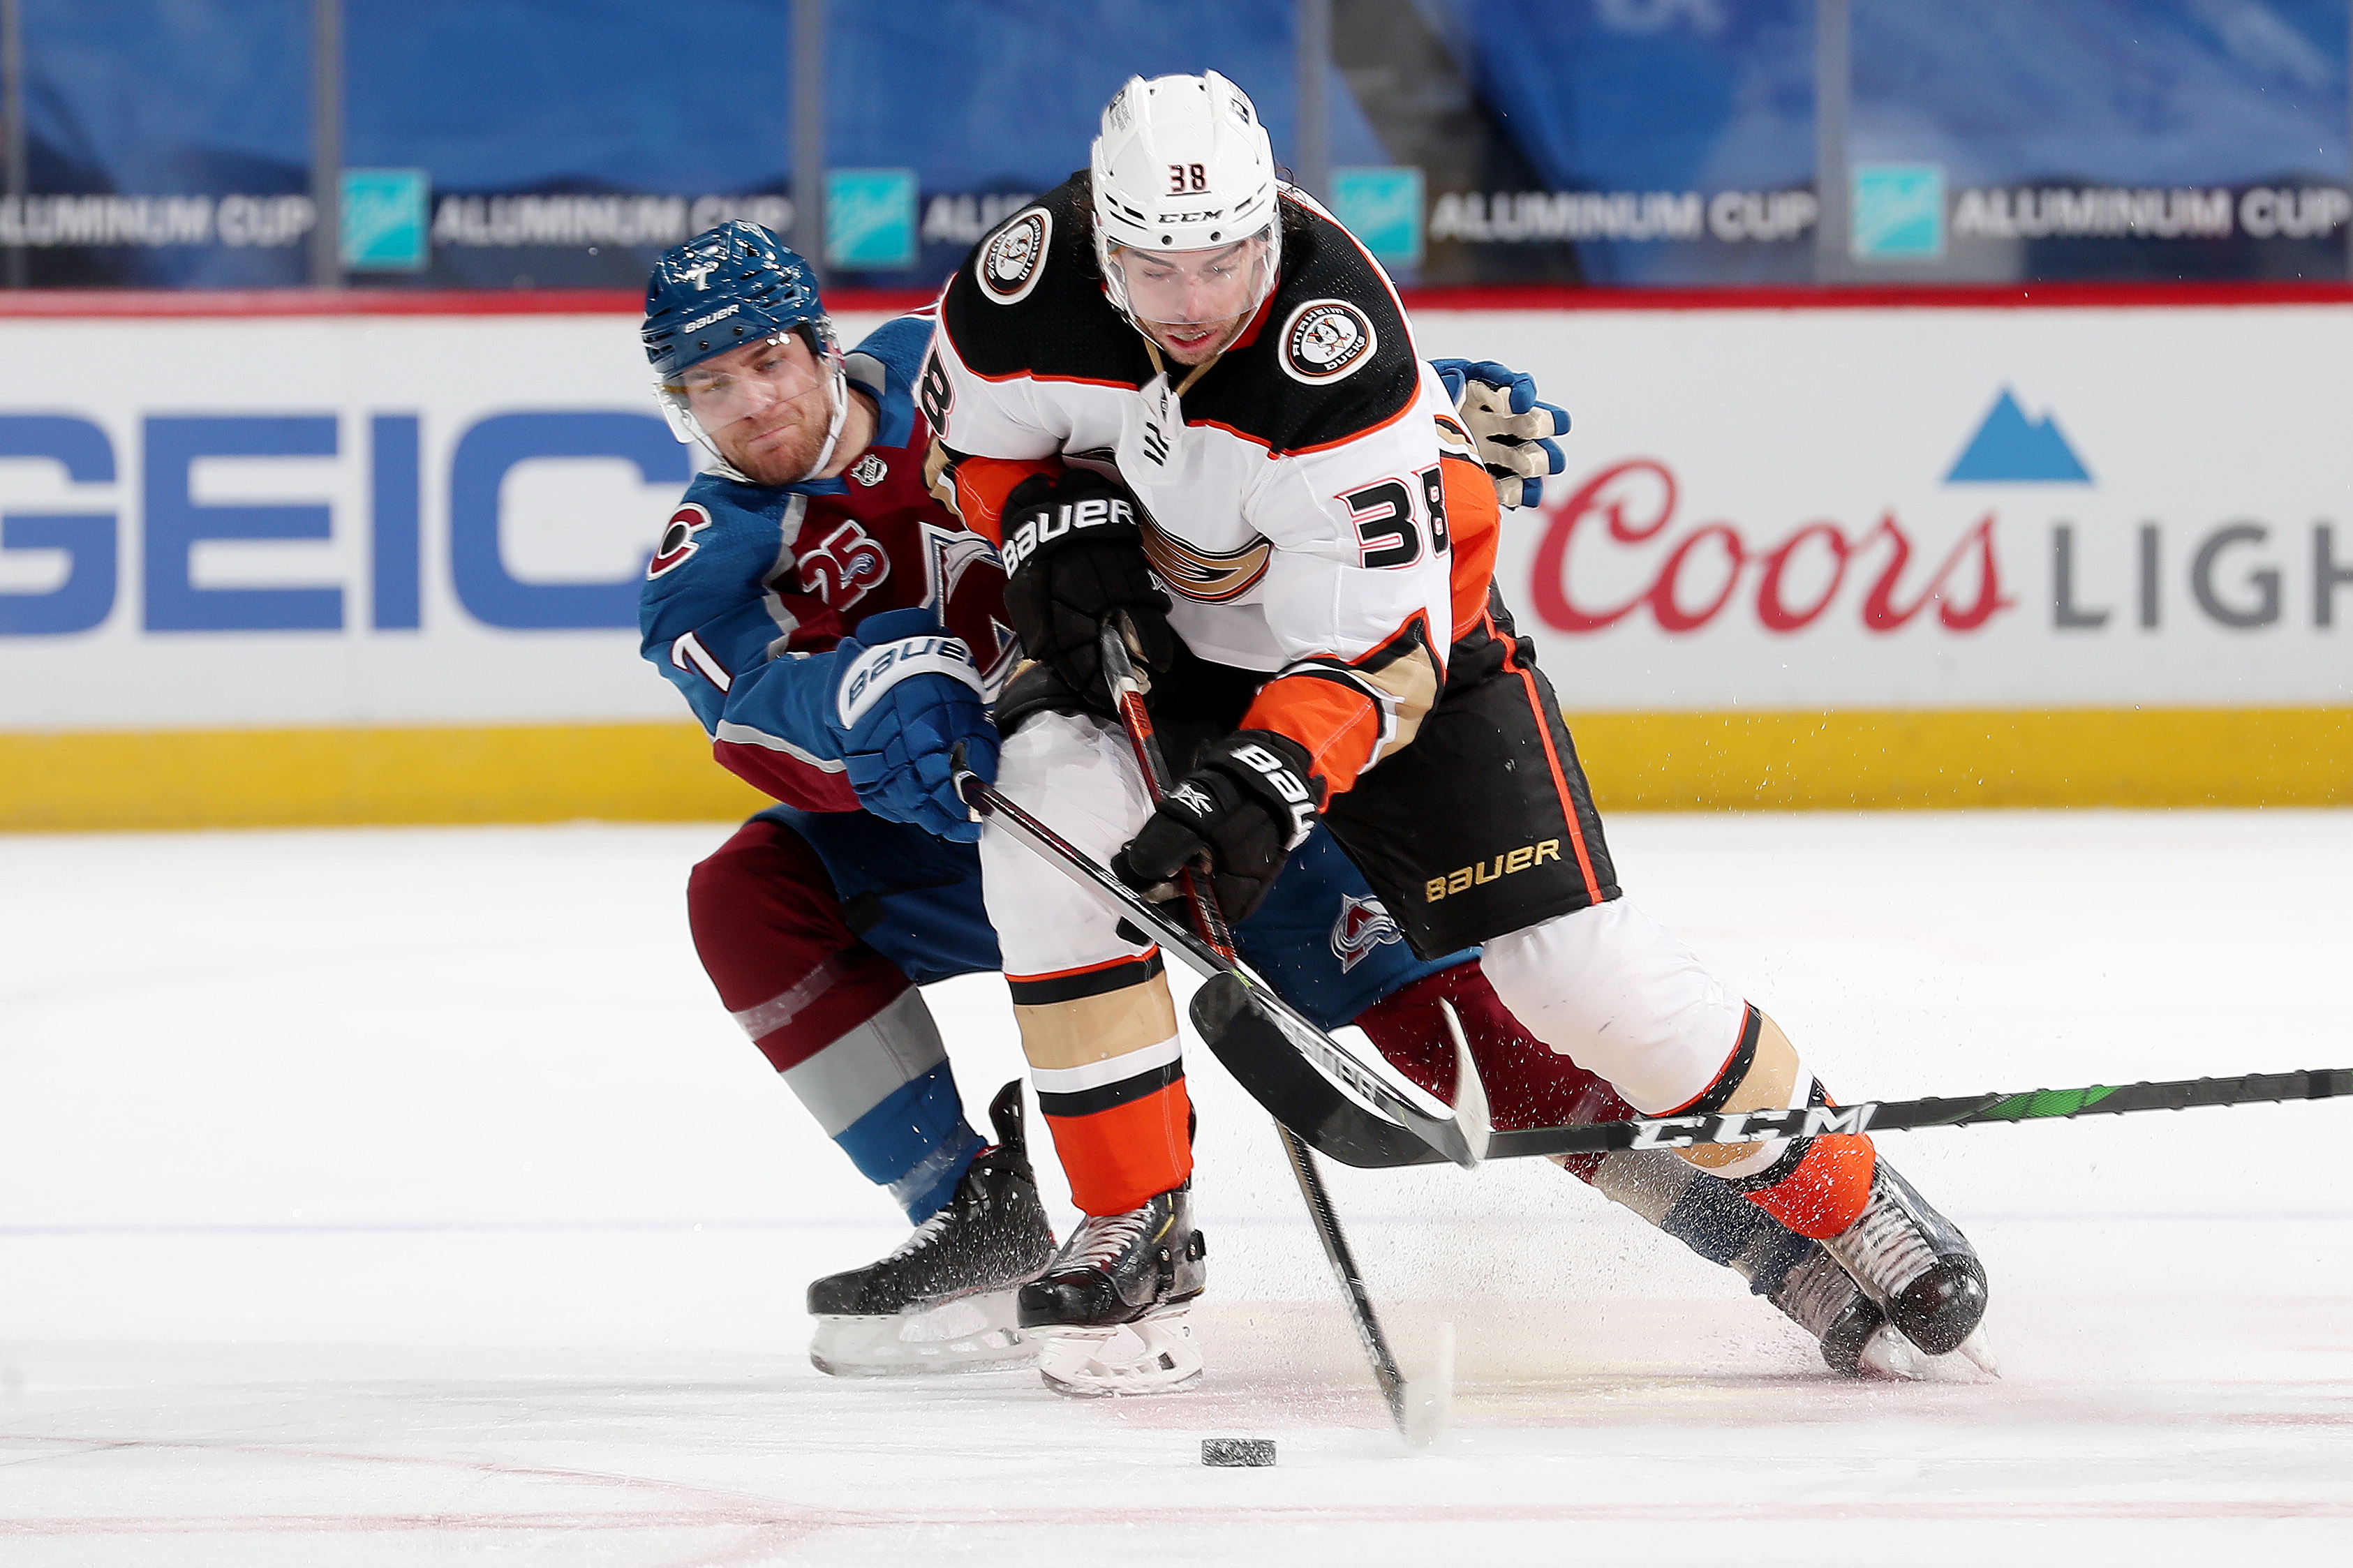 Derek Grant #38 of the Anaheim Ducks battles for position against Devon Toews #7 of the Colorado Avalanche at Ball Arena on March 29, 2021 in Denver, Colorado.